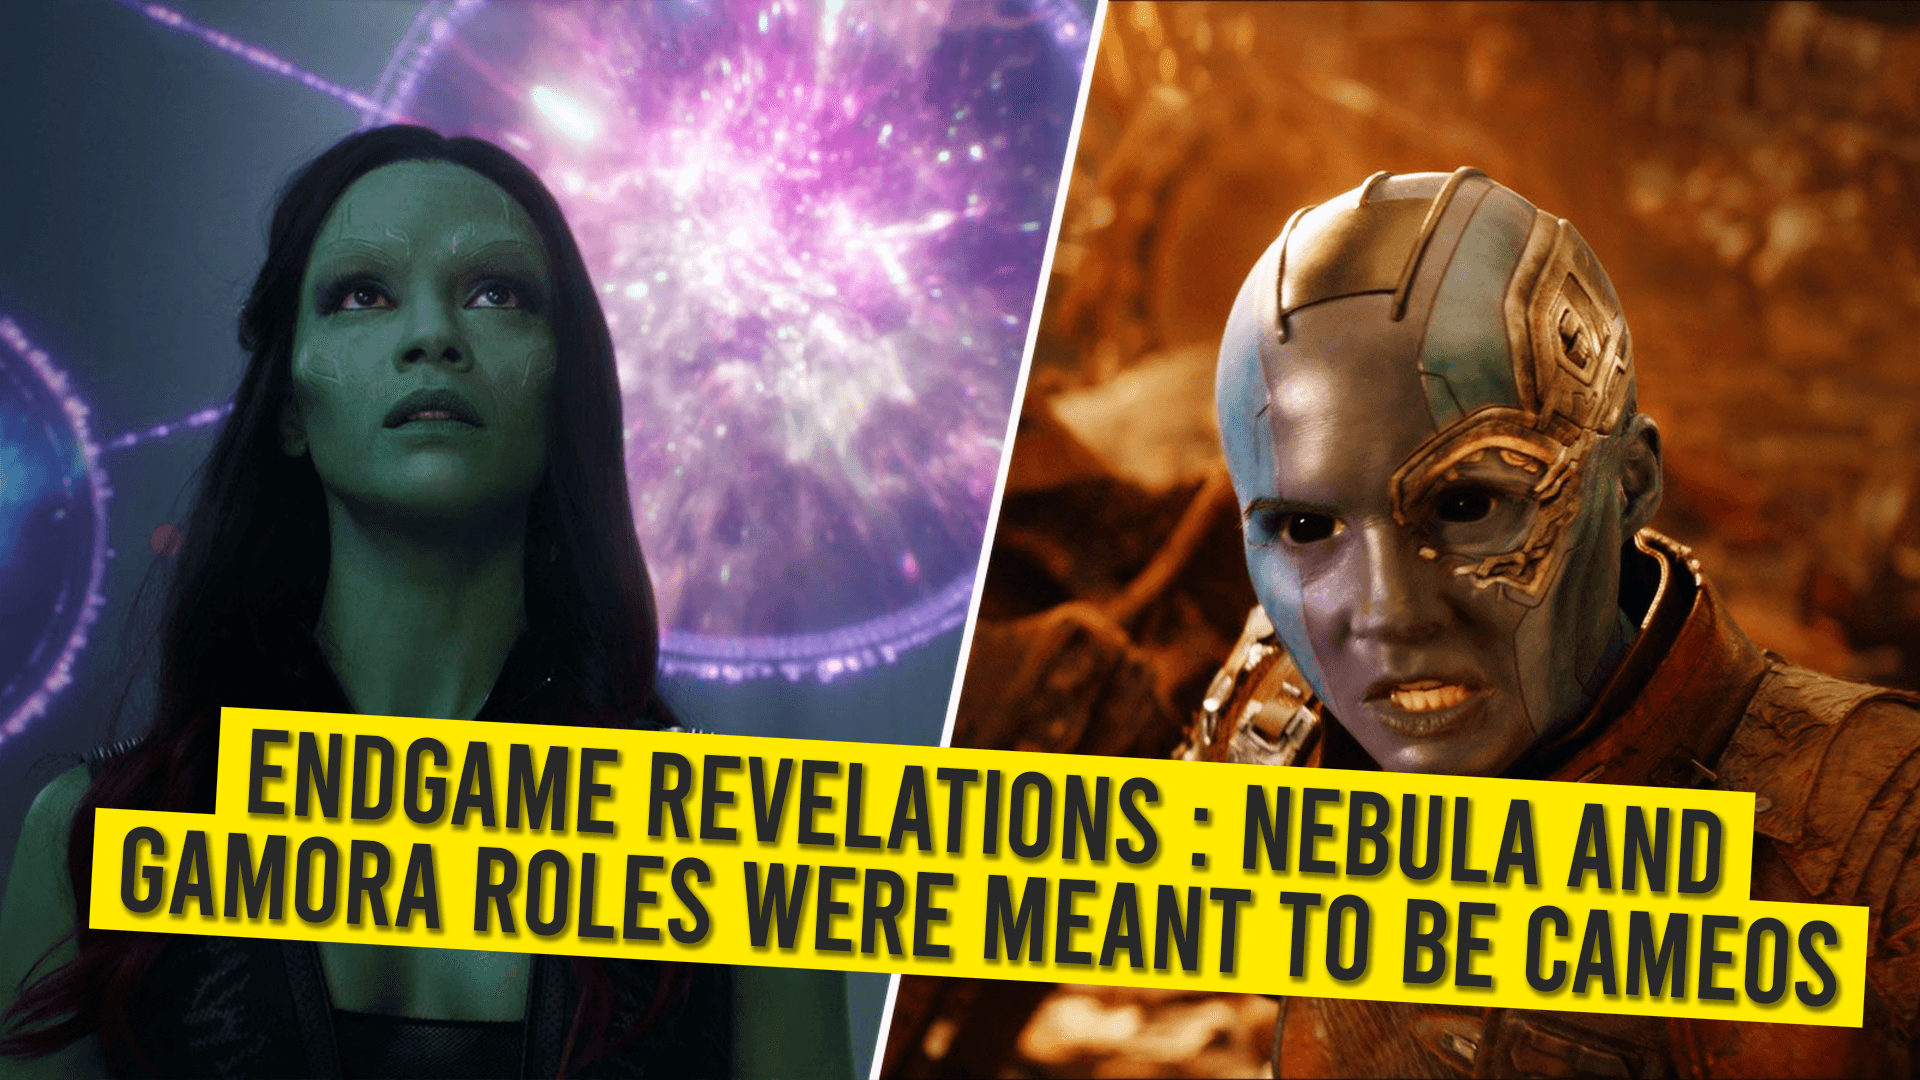 09 Endgame Revelations Nebula and Gamora roles Were Meant to be Cameos